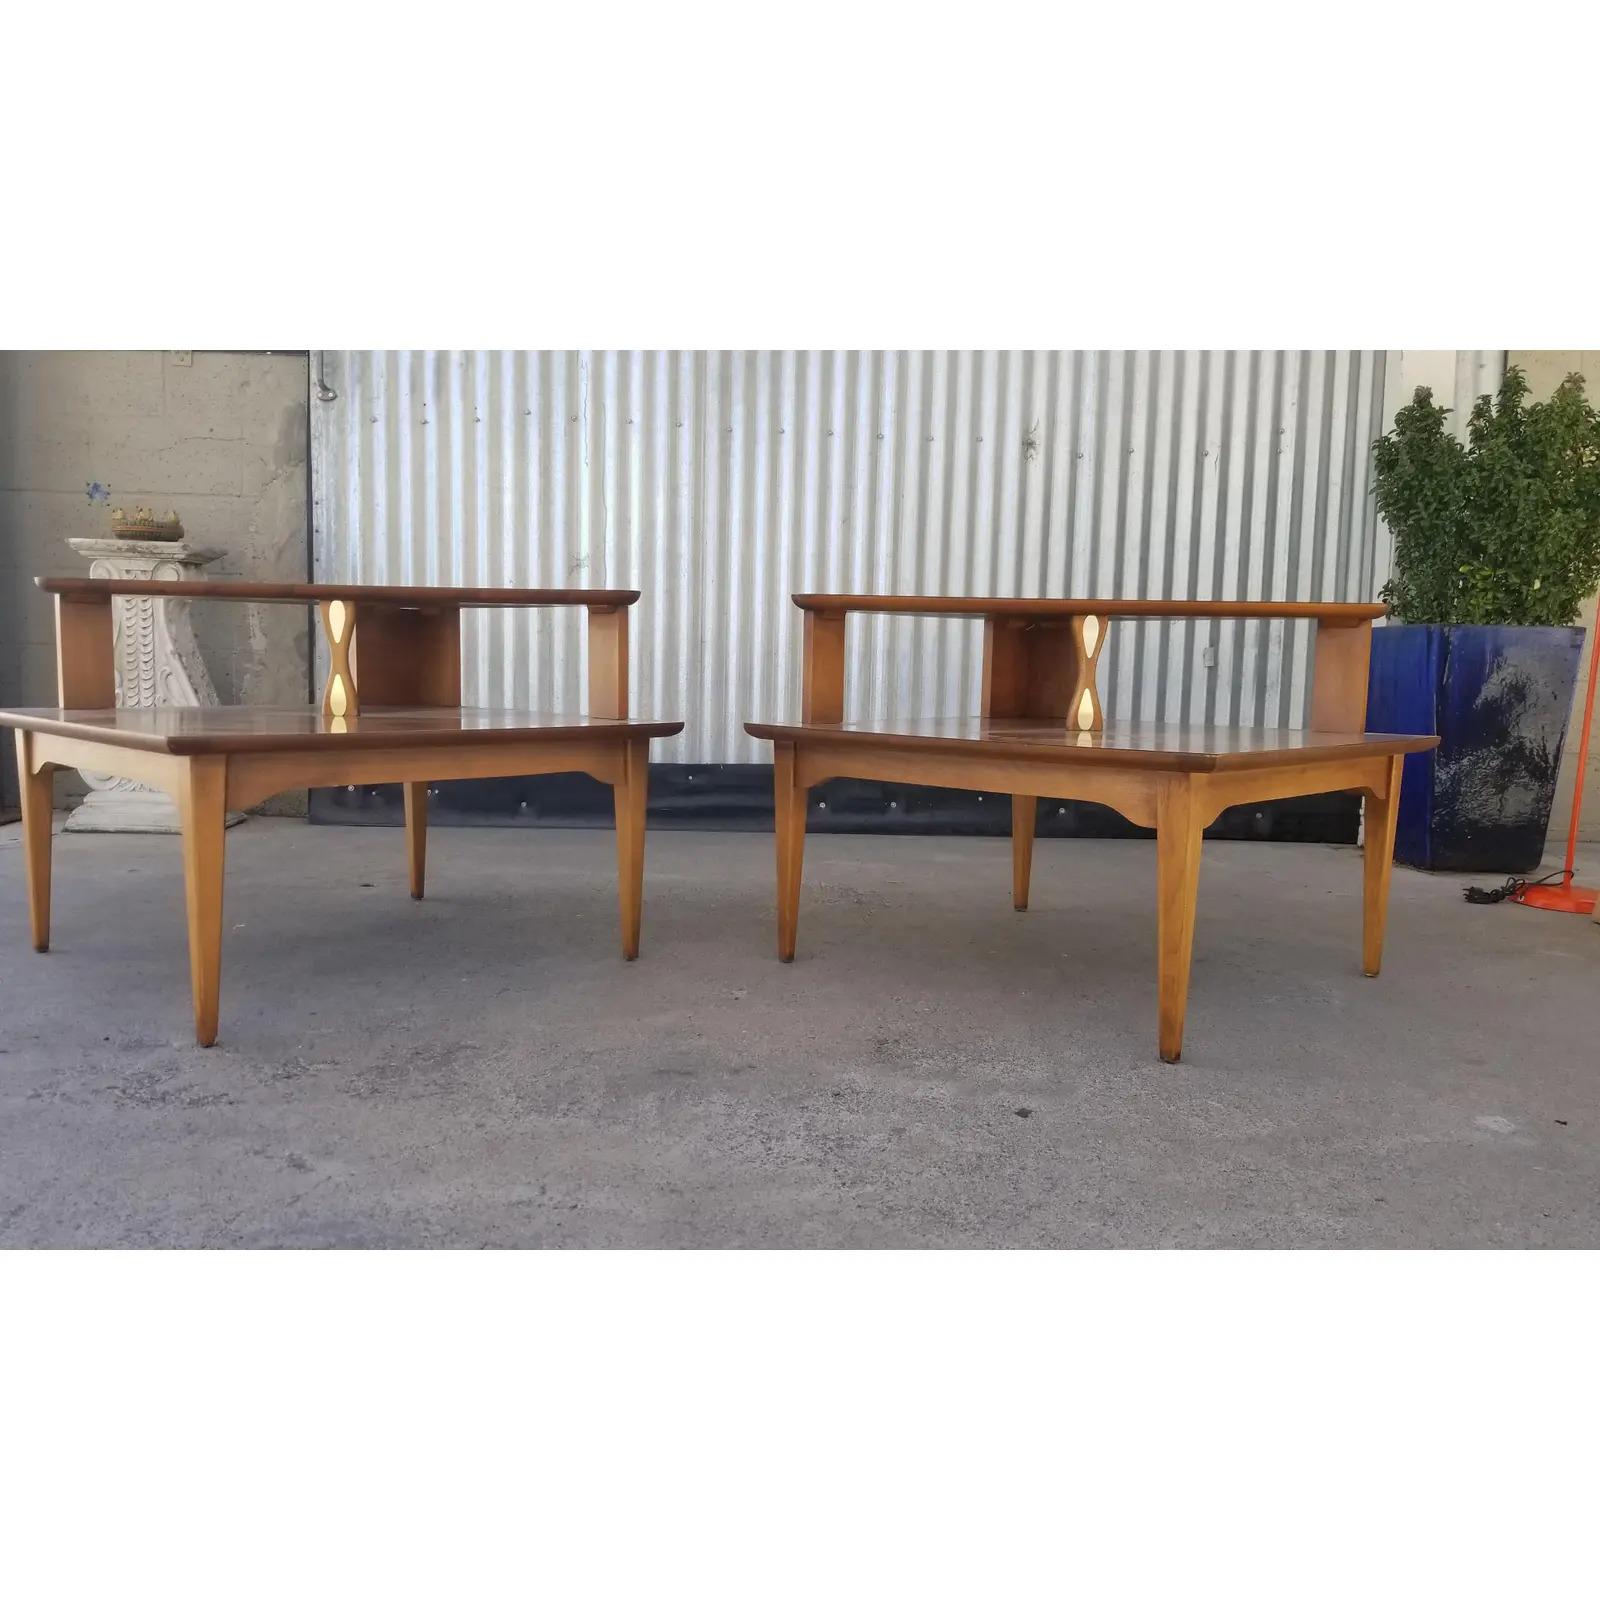 20th Century Mid-Century Modern Corner Tables by Lane Furniture, a Pair